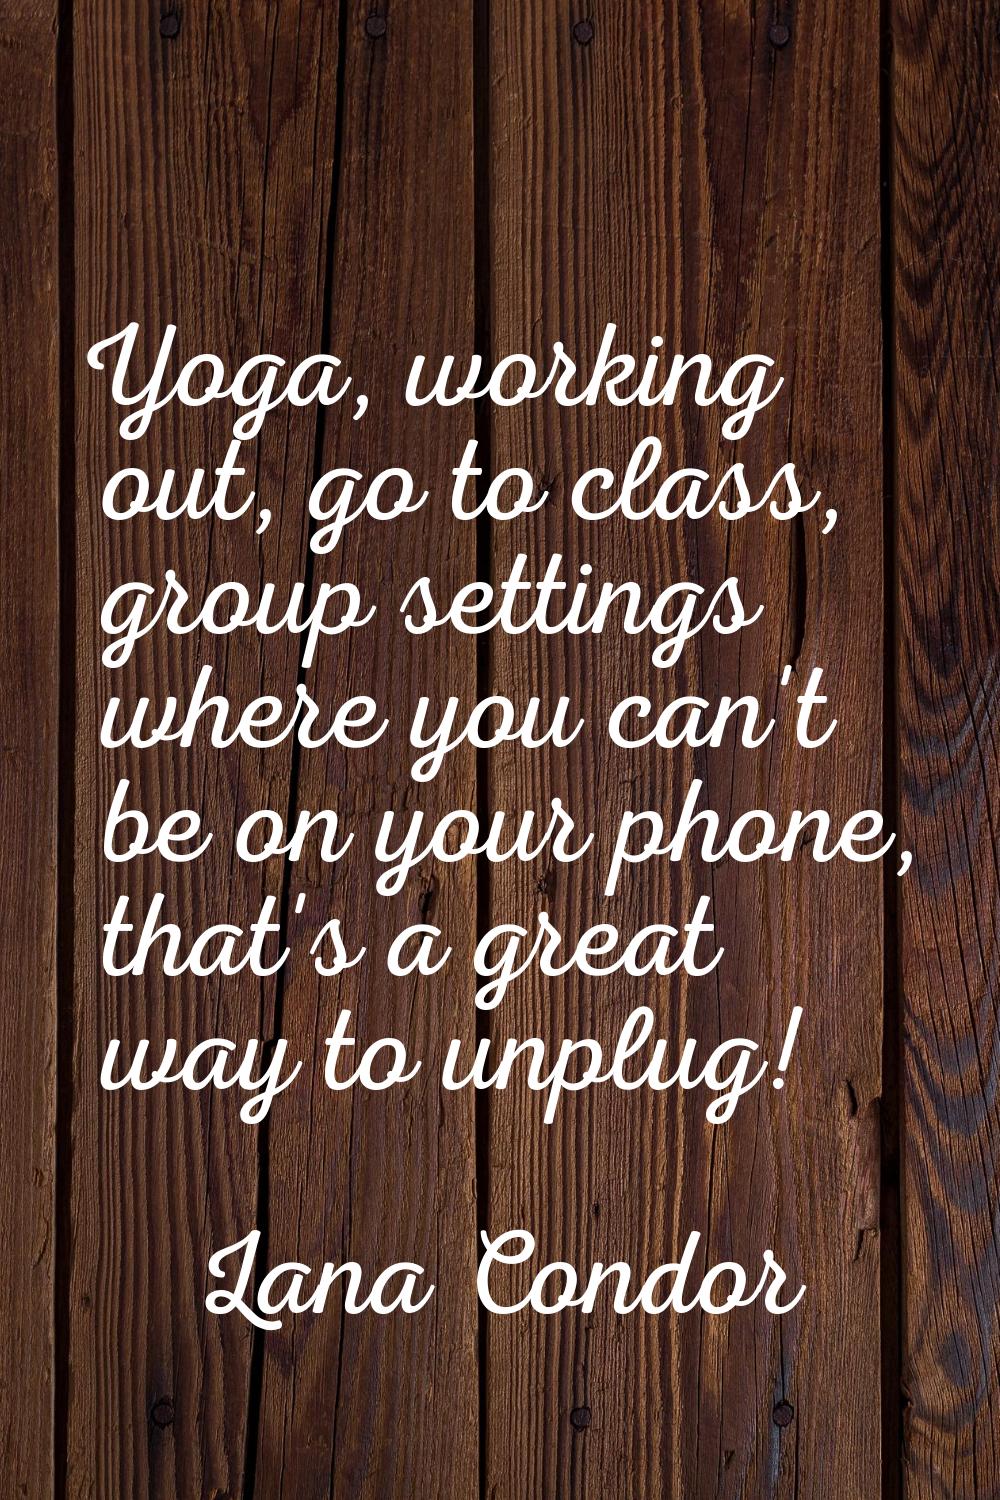 Yoga, working out, go to class, group settings where you can't be on your phone, that's a great way